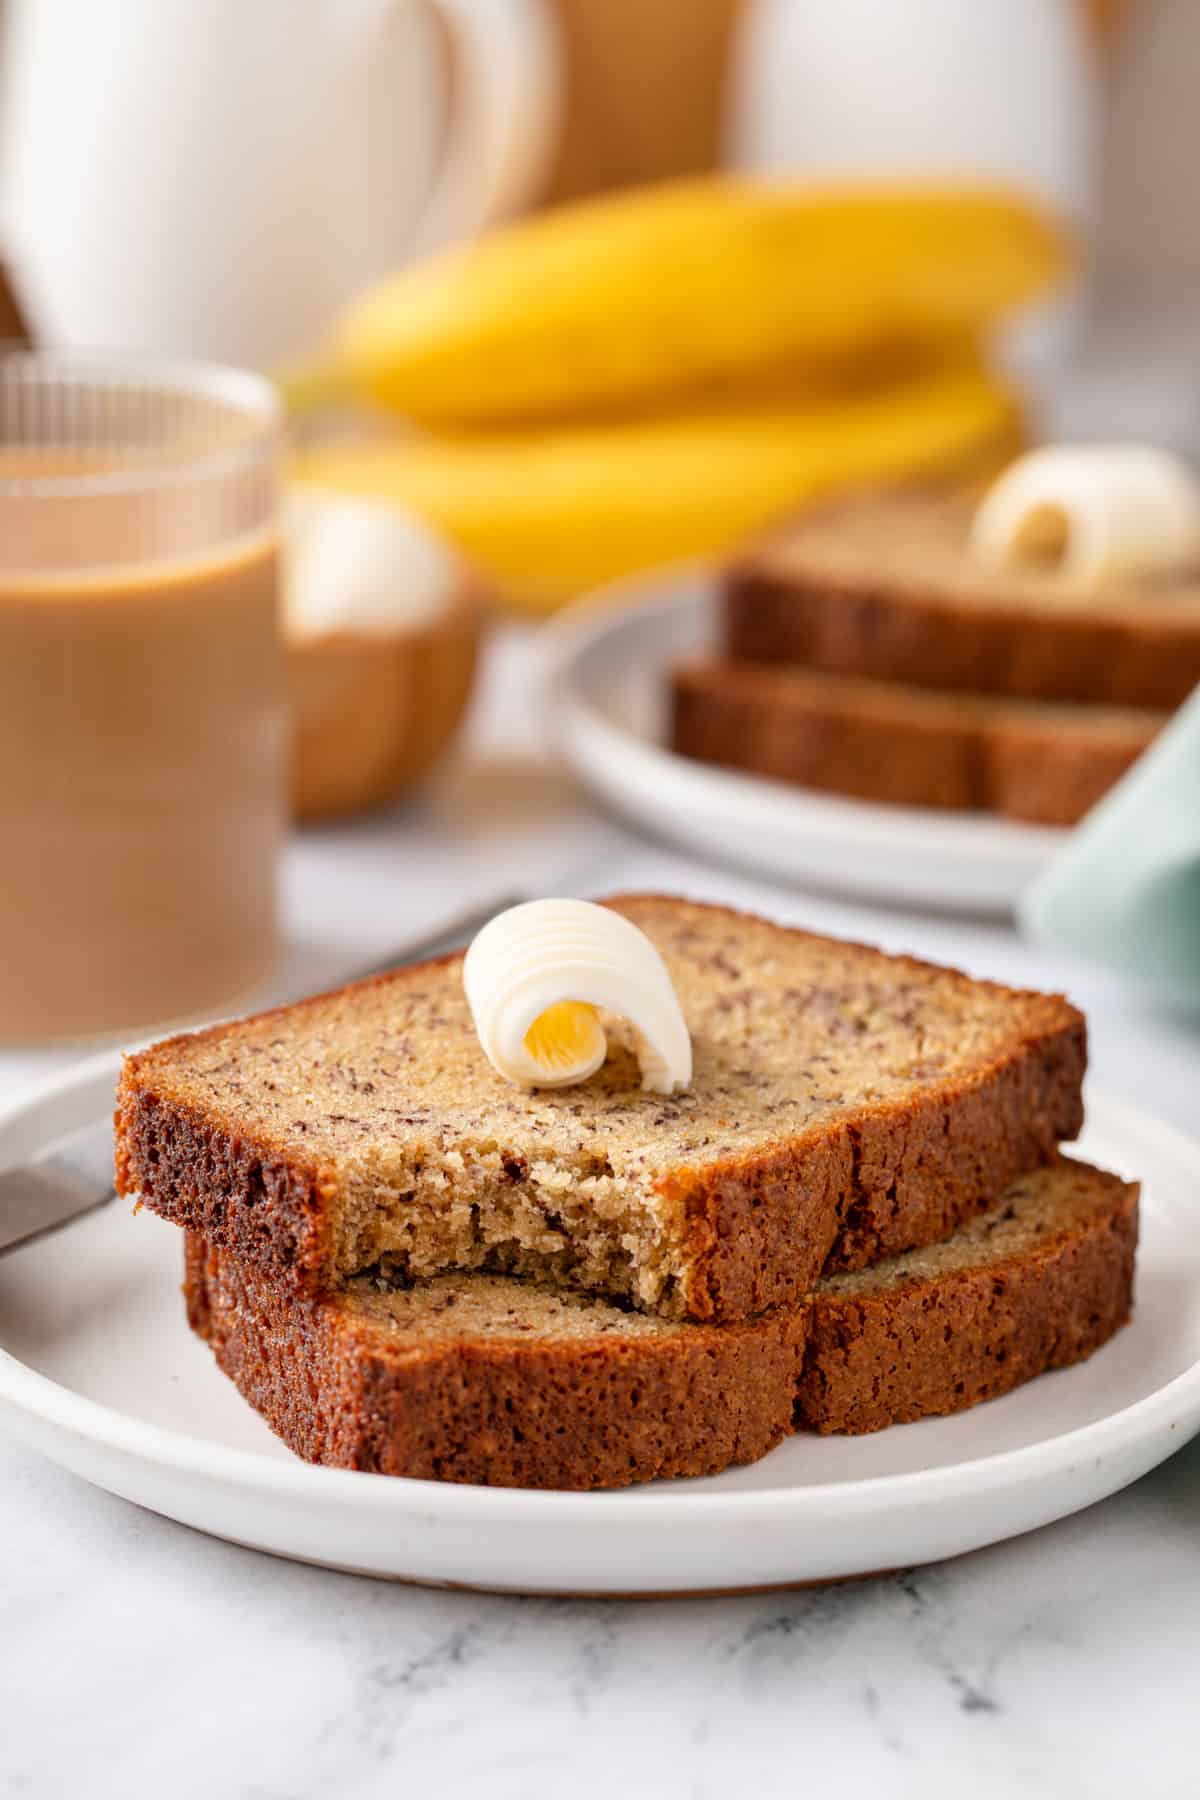 Two slices of banana bread stacked on a white plate. A bite has been taken from the corner of the top slice.